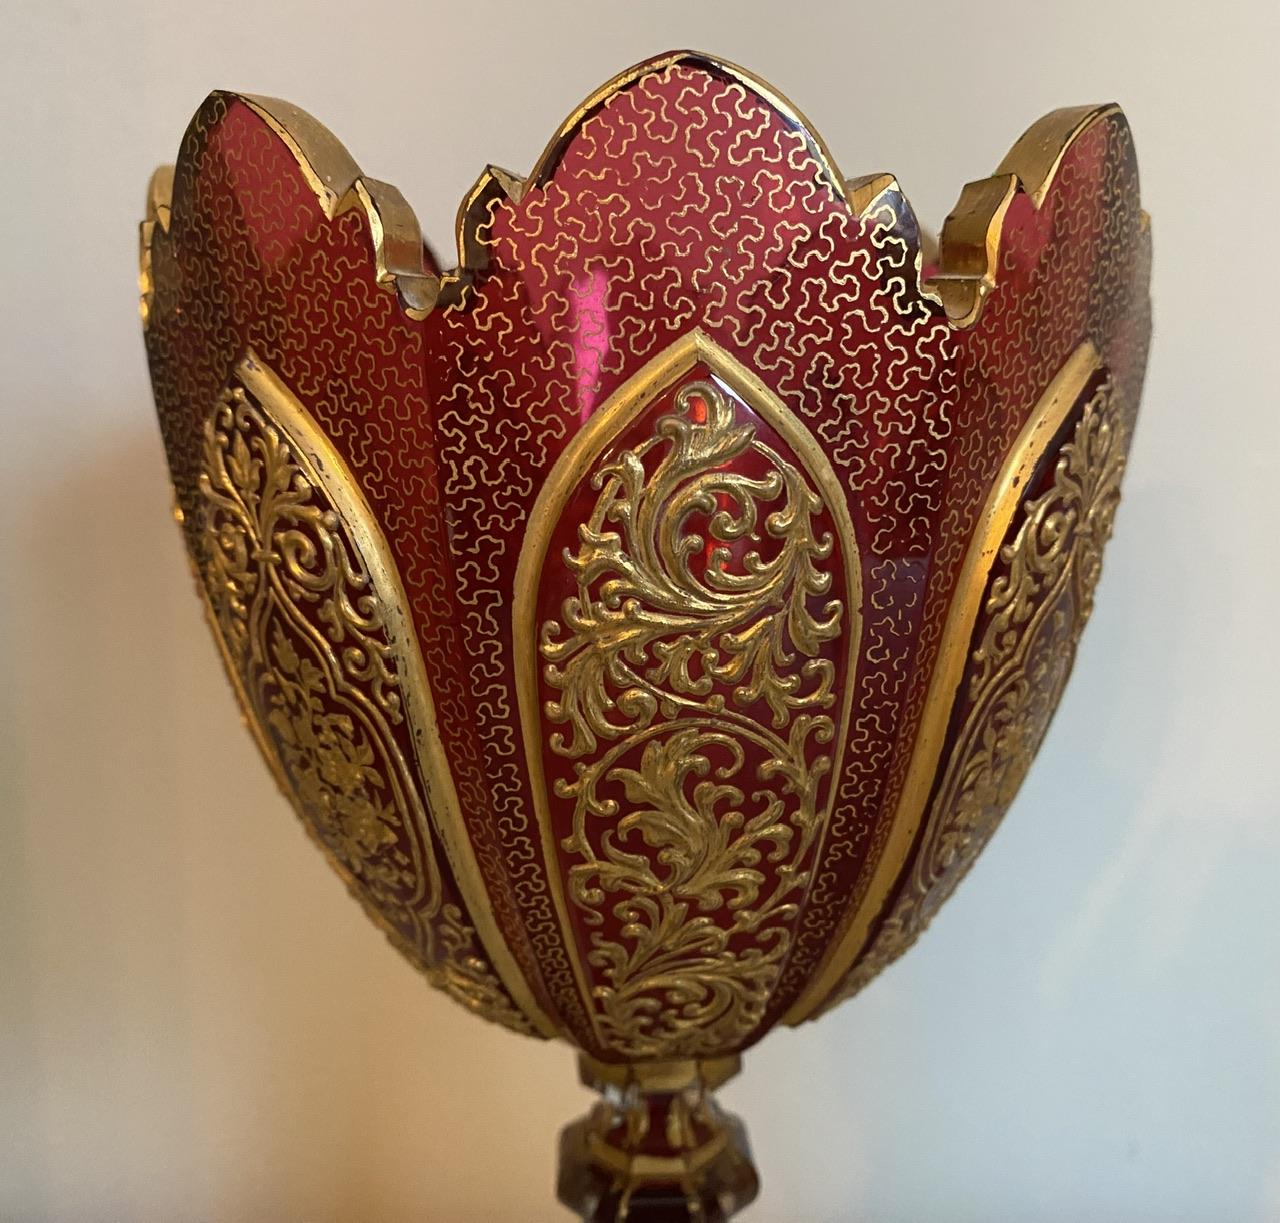 A stunning example of Bohemian Glass, a tall ruby glass vase with gilding and intricate gold filigree work. This is the finest quality of Bohemian glass and in perfect condition.
Height 28 cm
Diameter 13 cm